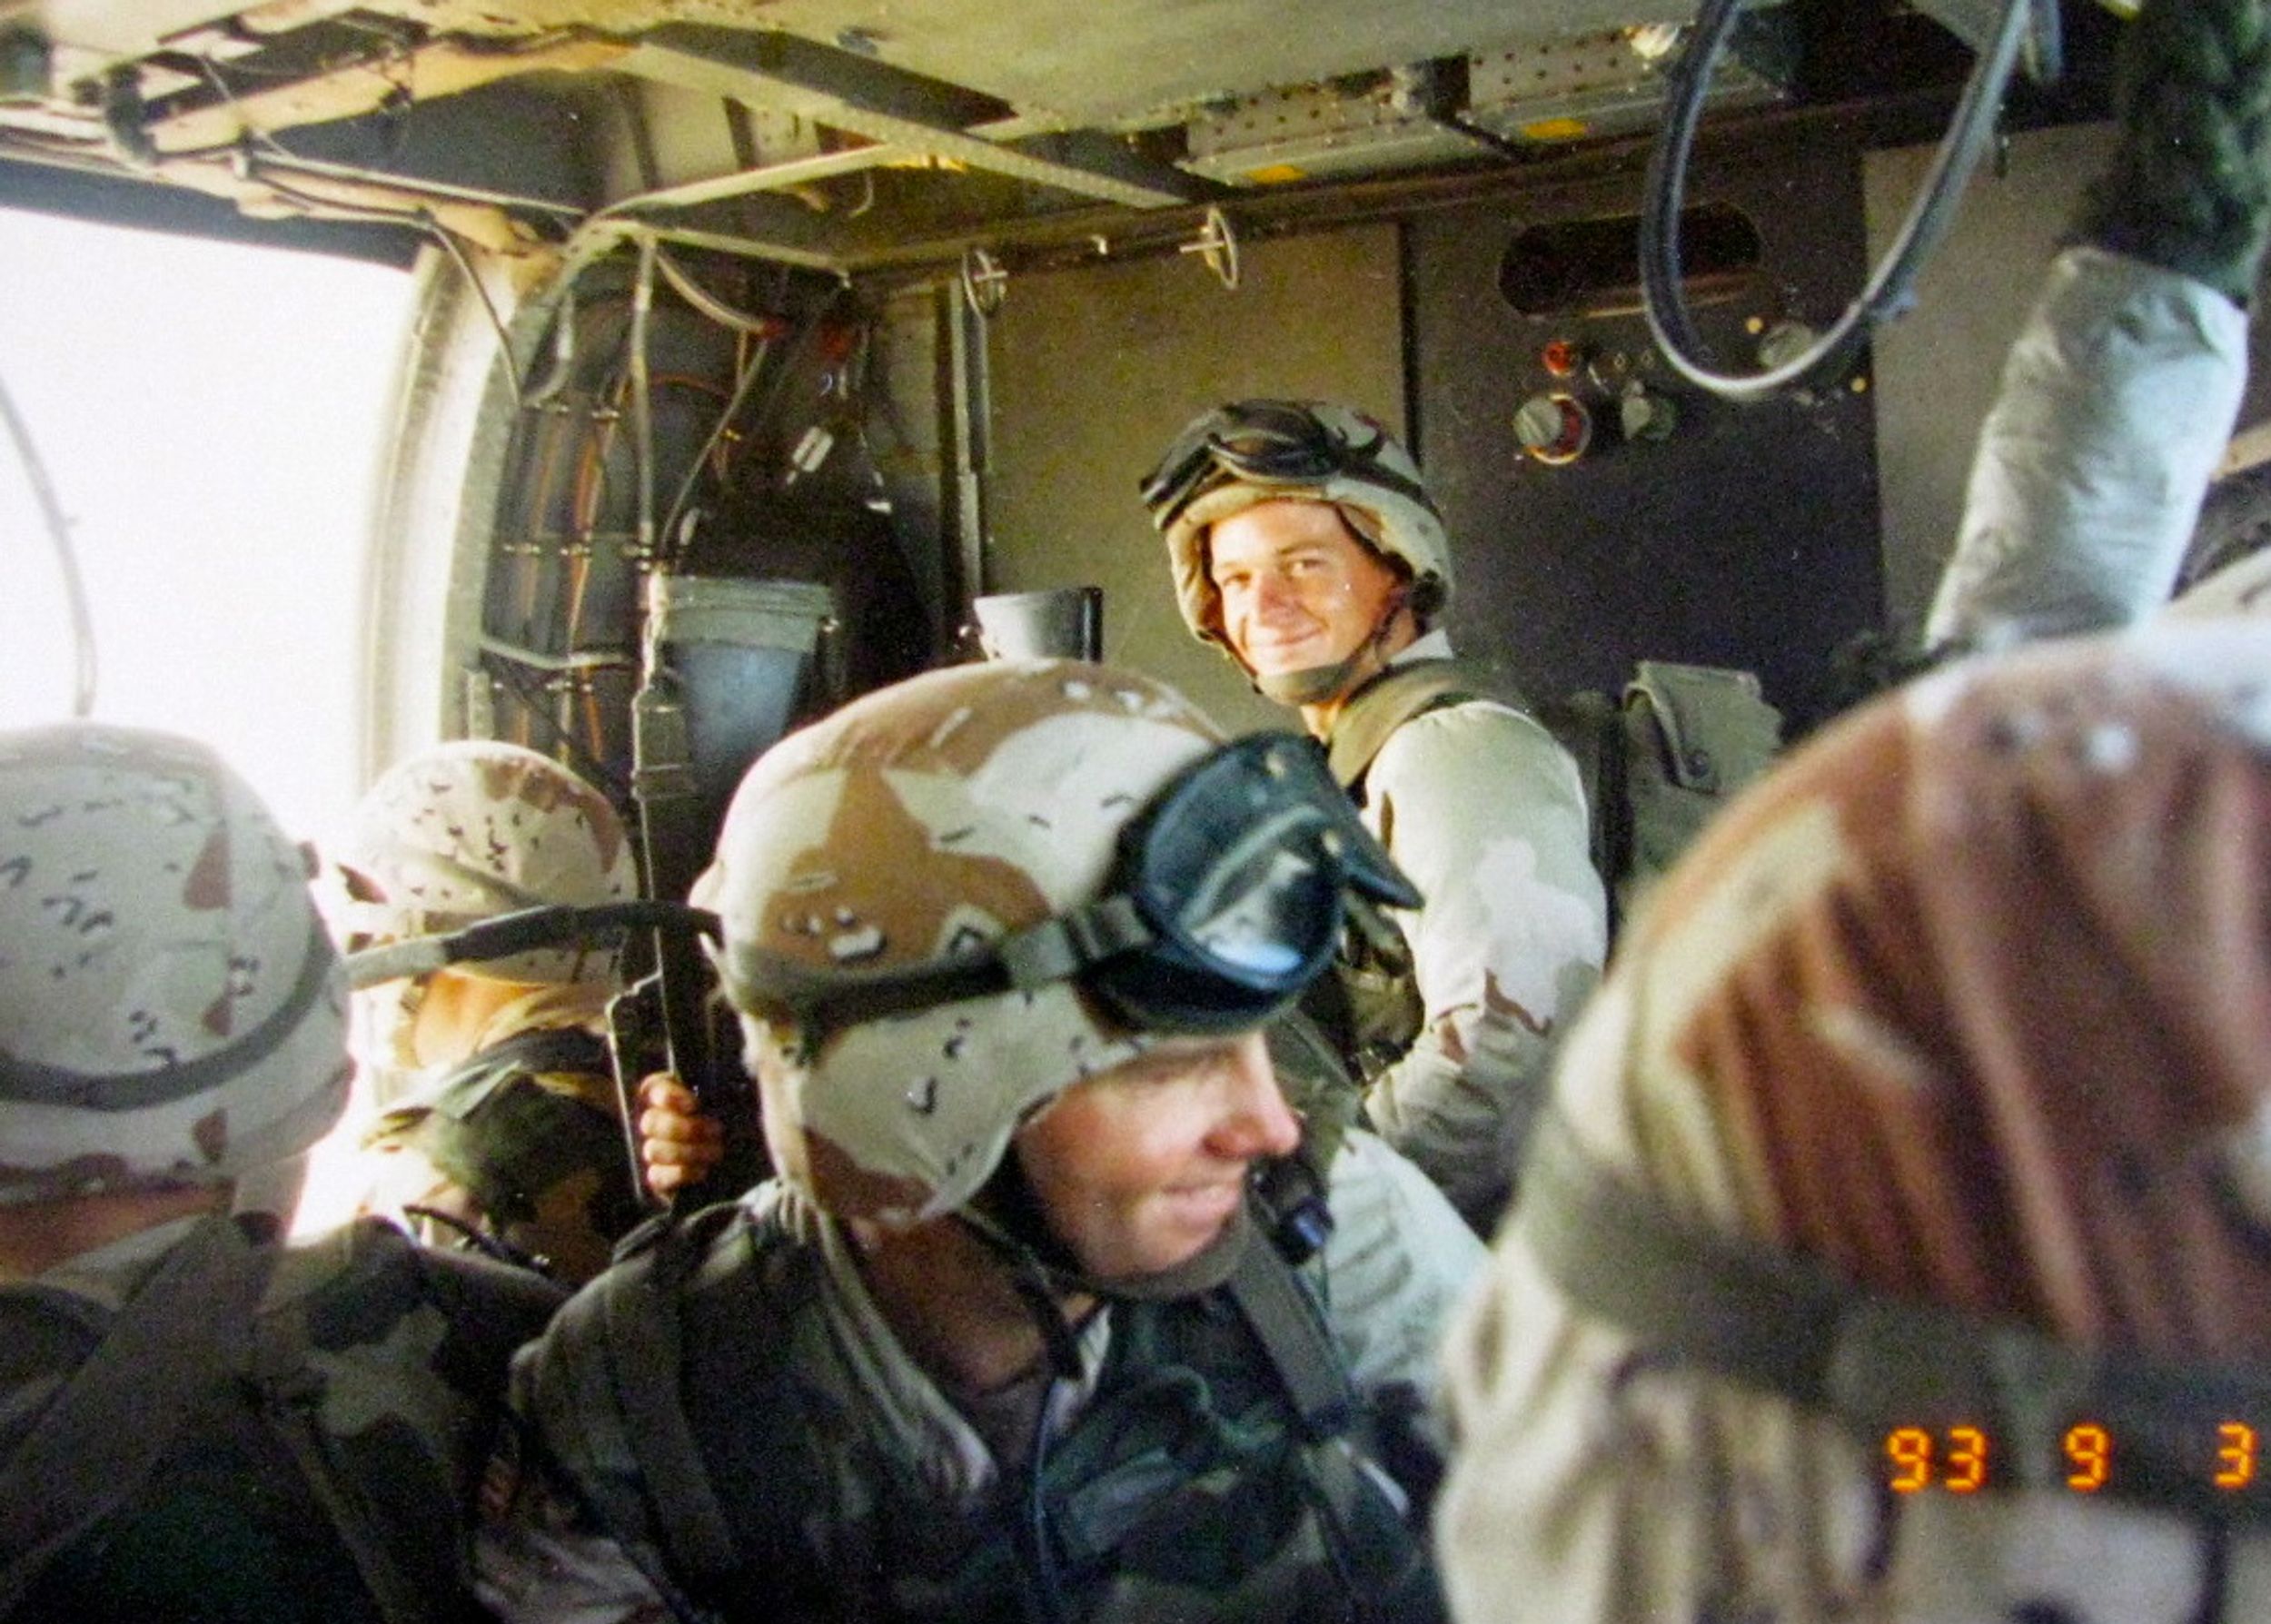 On The American Heroes of the Battle of Mogadishu